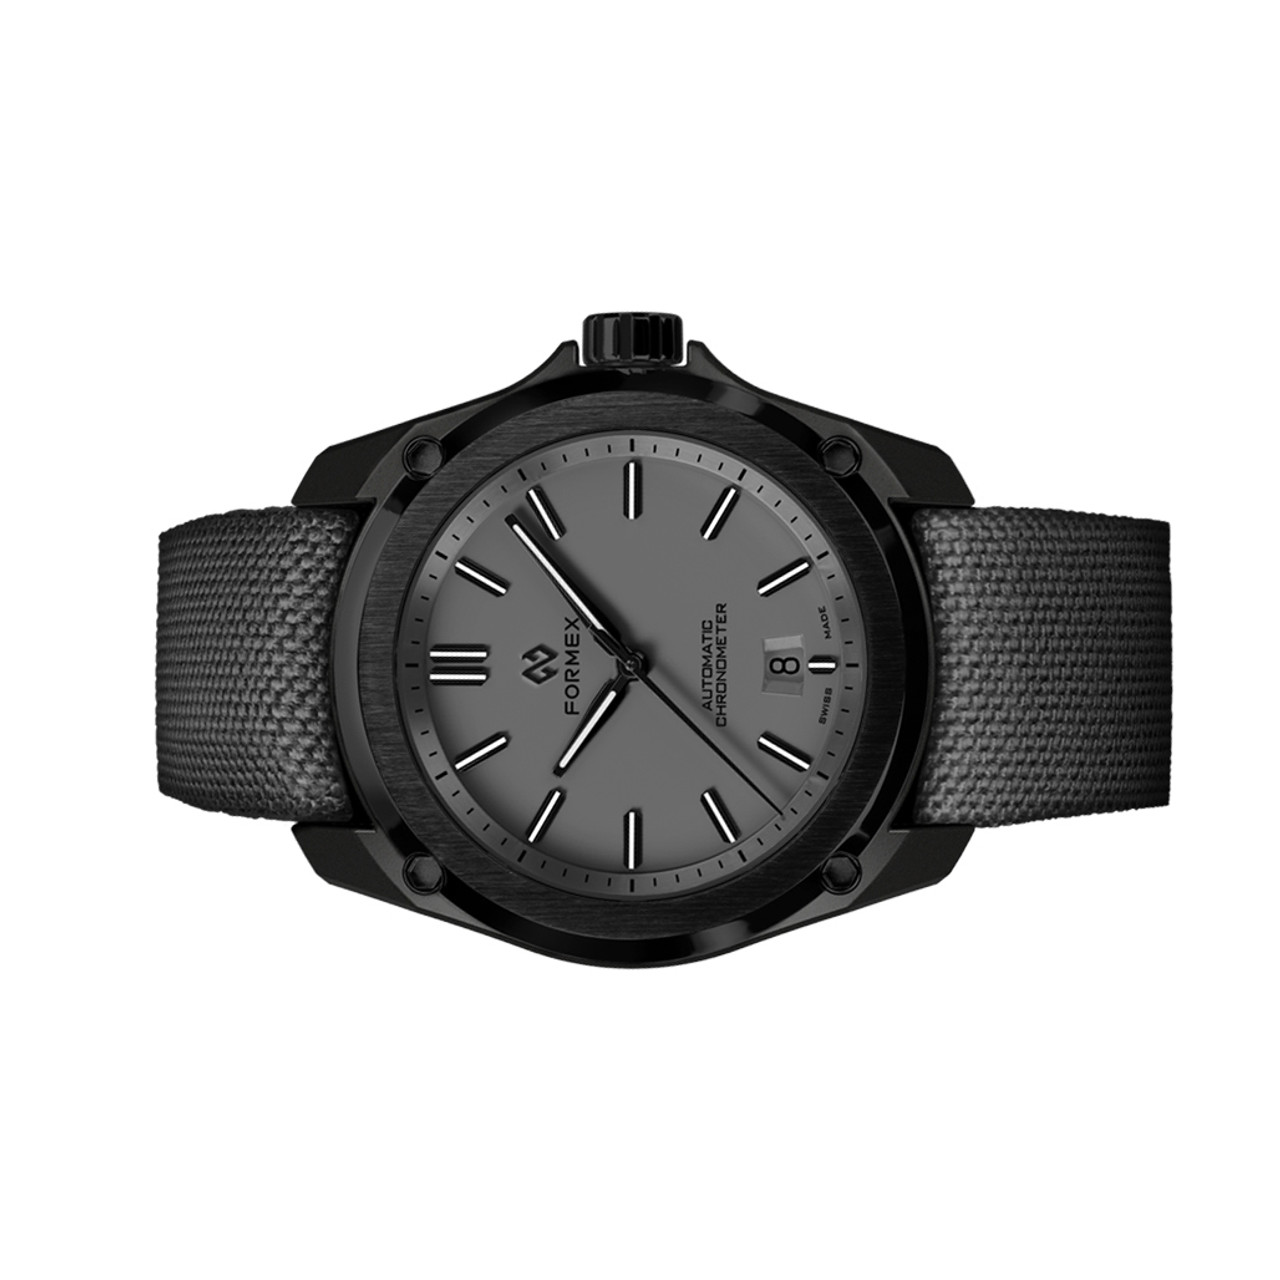 Formex Essence Leggera FortyOne (41mm) COSC Automatic Carbon Case Watch  with Cool Grey Dial #0331.4.6309.833